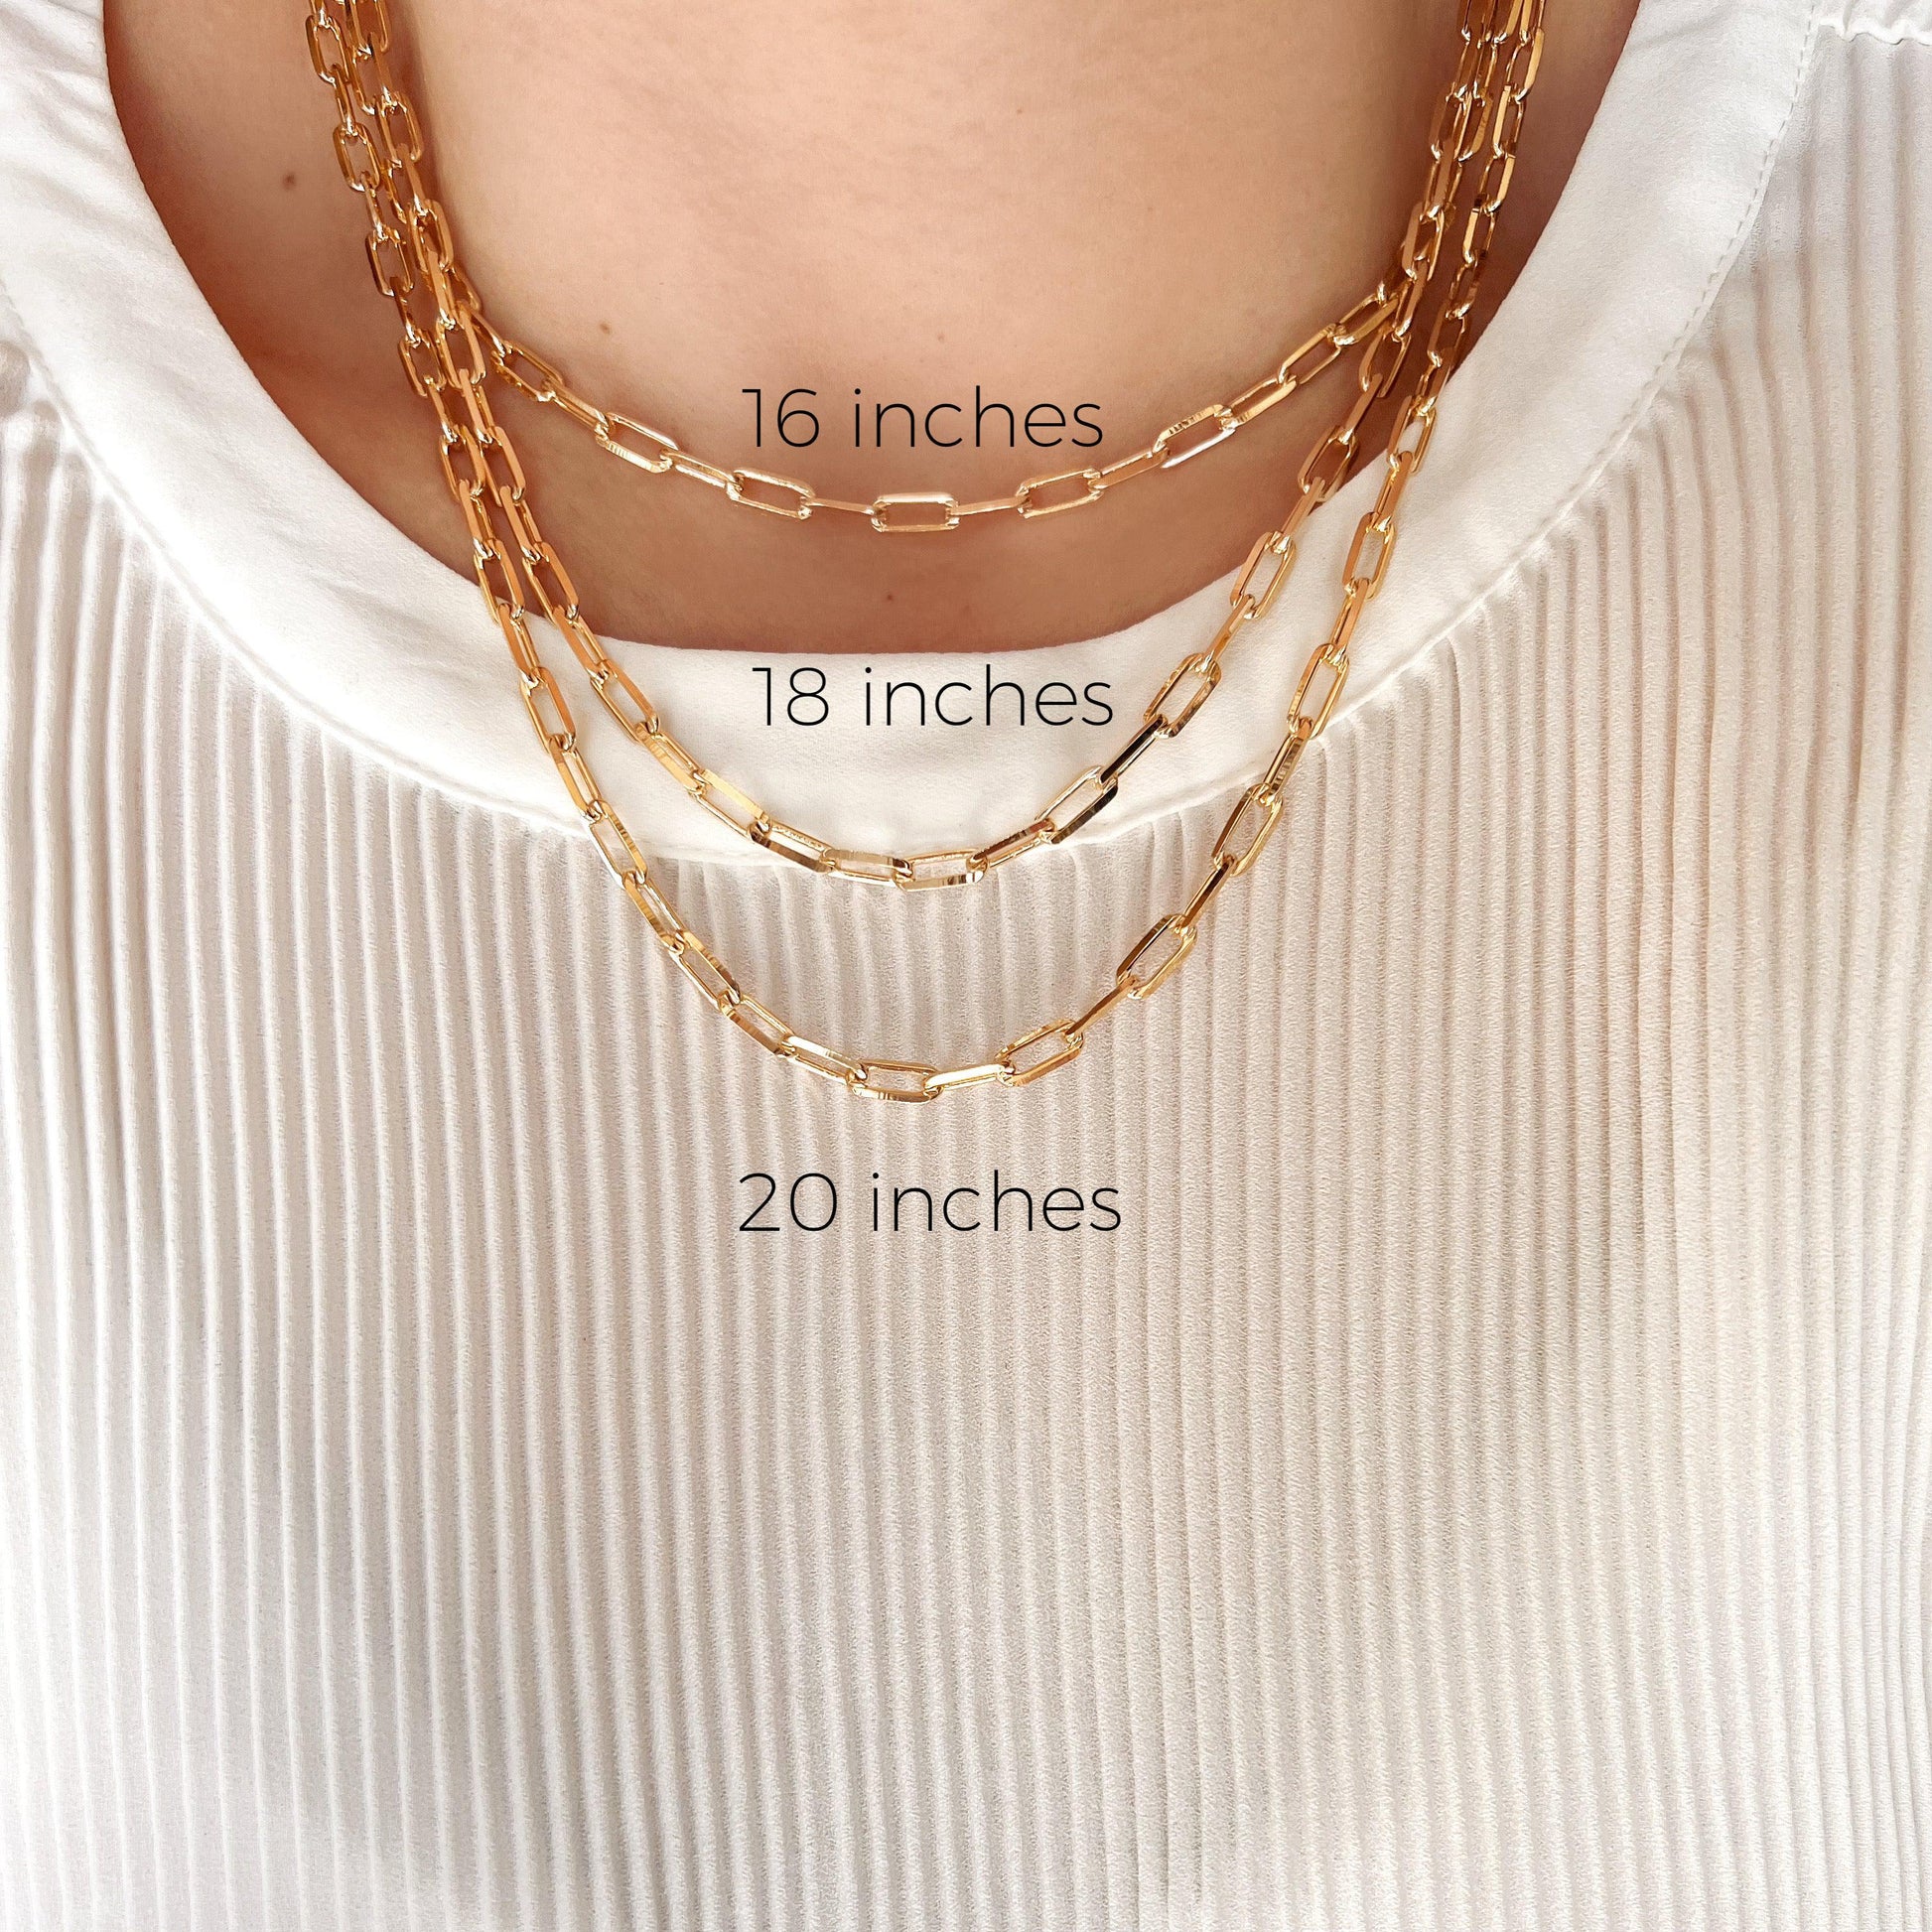 Cali Paperclip Chain Necklace (18 in)